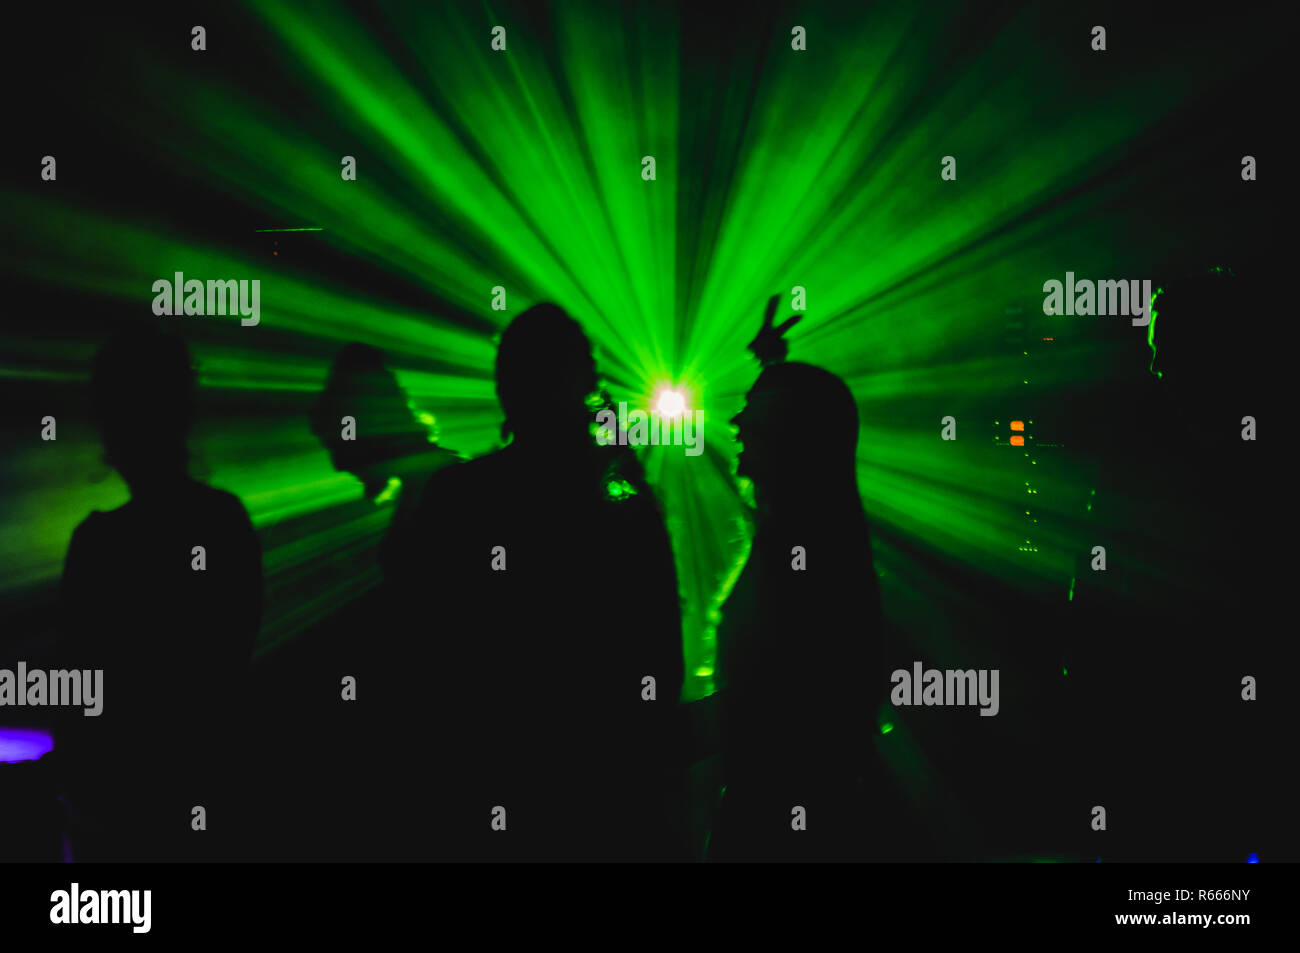 Male and Female dancers silhouetted by the lights in the night club. Stock Photo